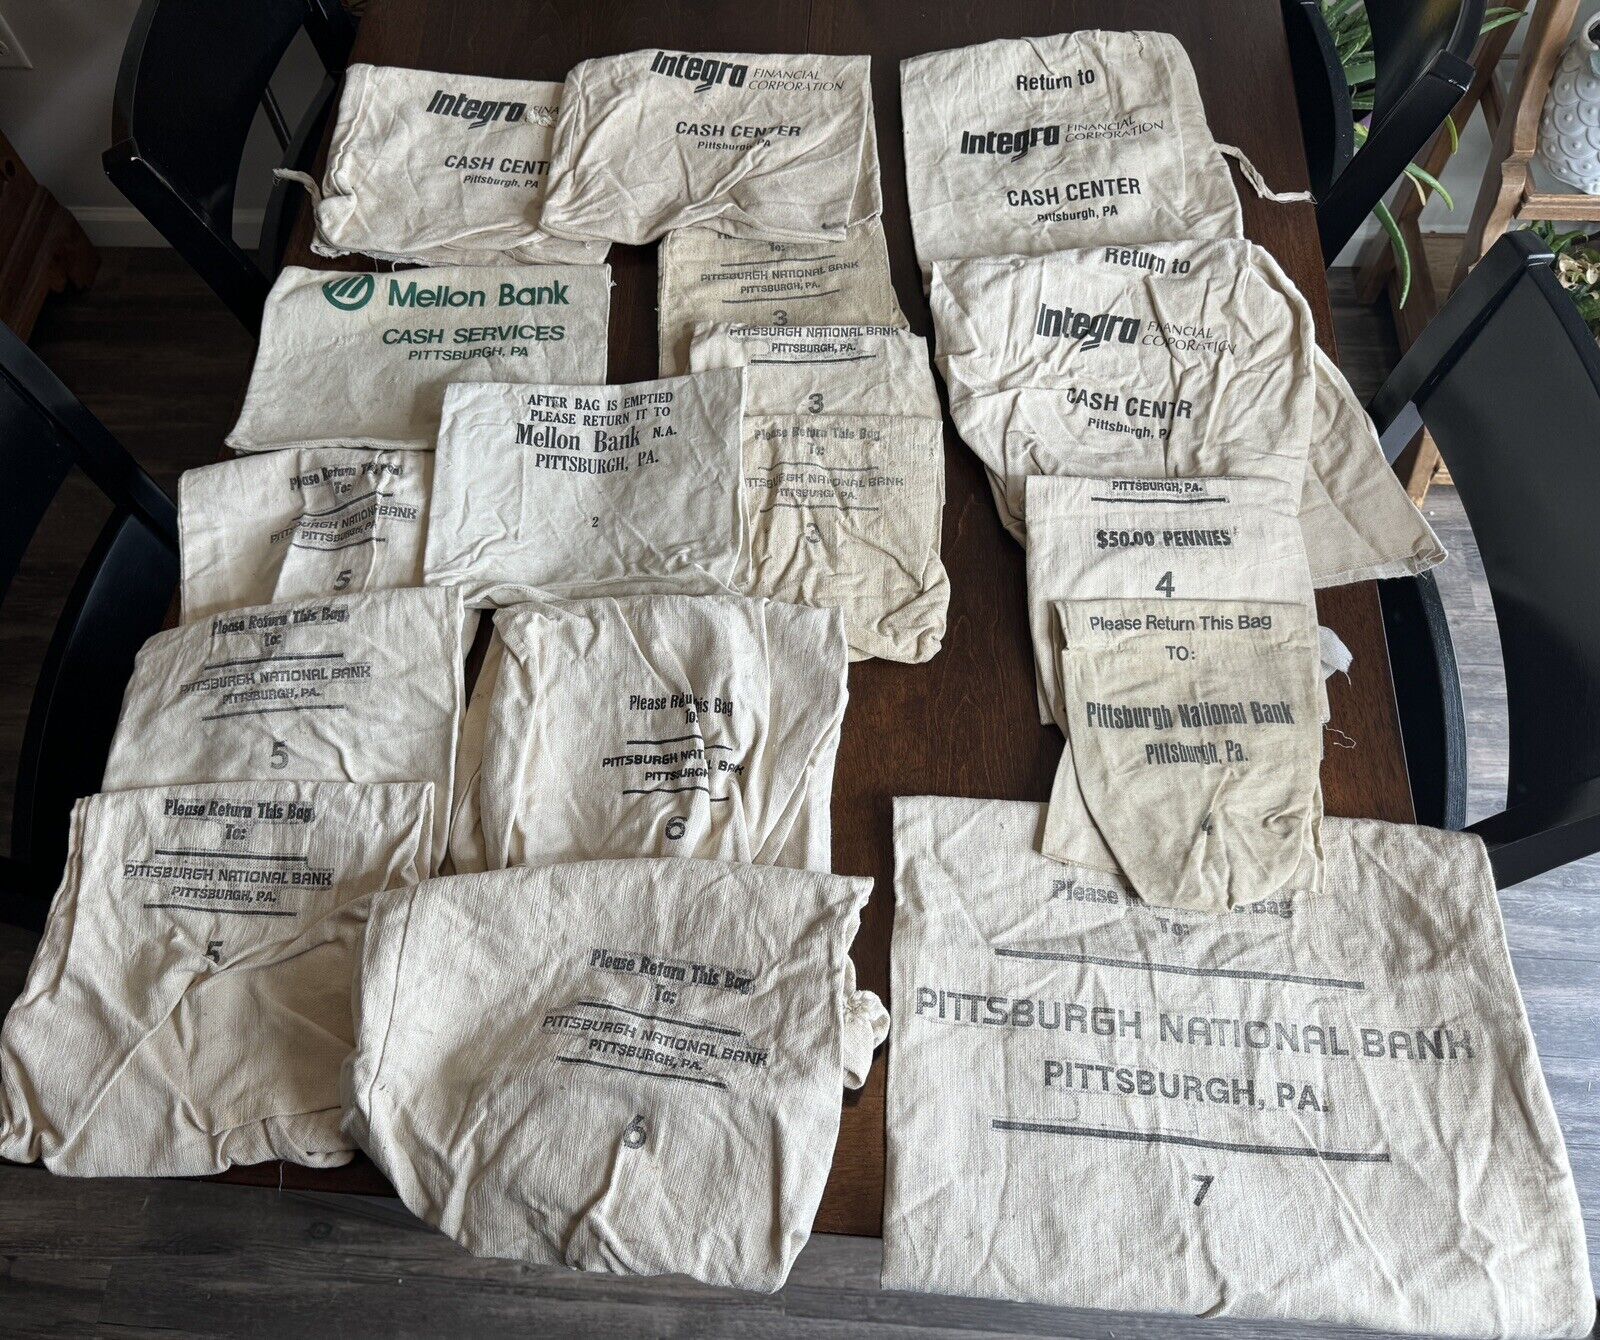 Lot of 17 Vintage Pittsburgh National Bank EMPTY MONEY BAGS Integra Cash Center